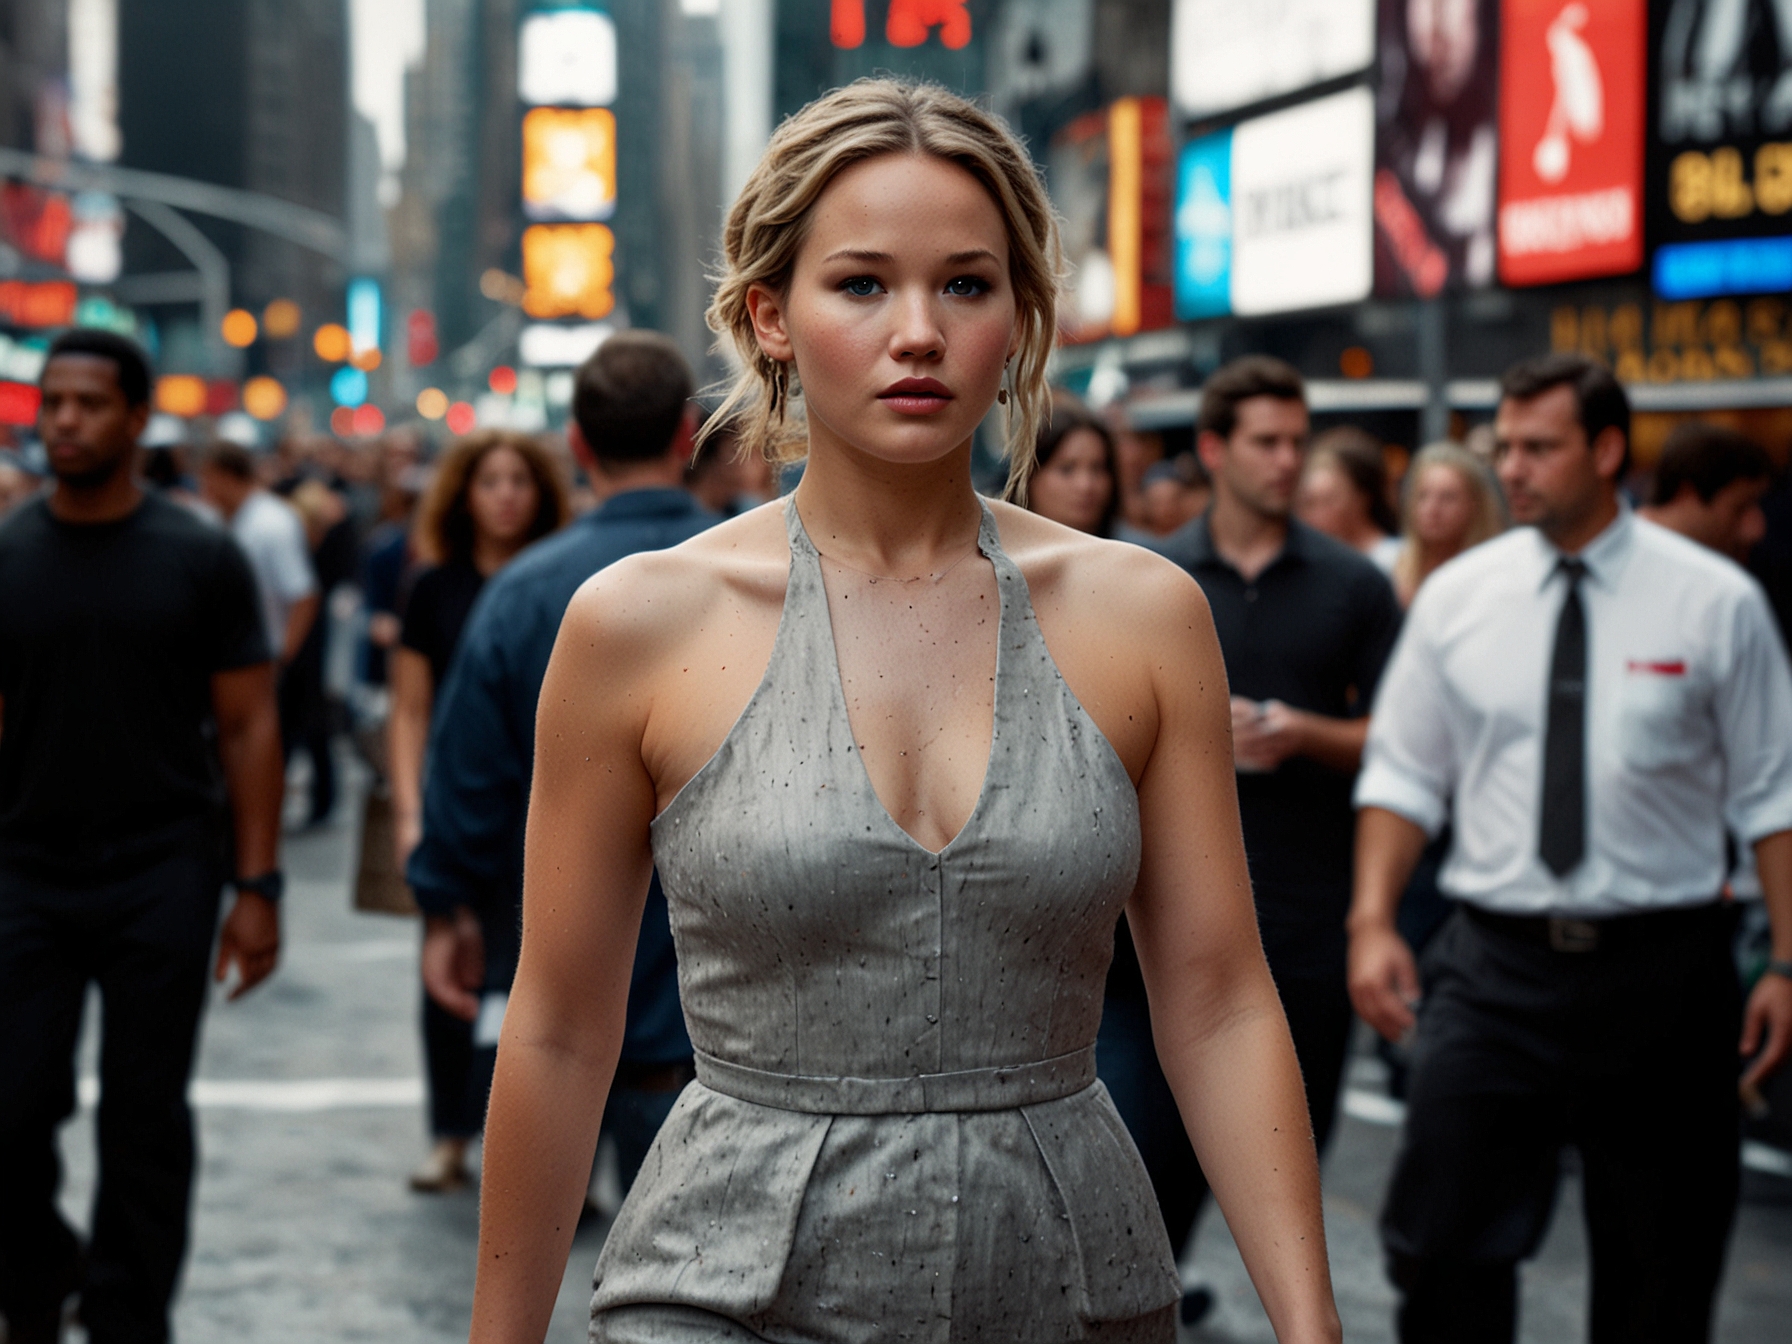 Jennifer Lawrence gracefully navigating through a crowded Times Square, illustrating her composure and resilience despite the overwhelming public attention.